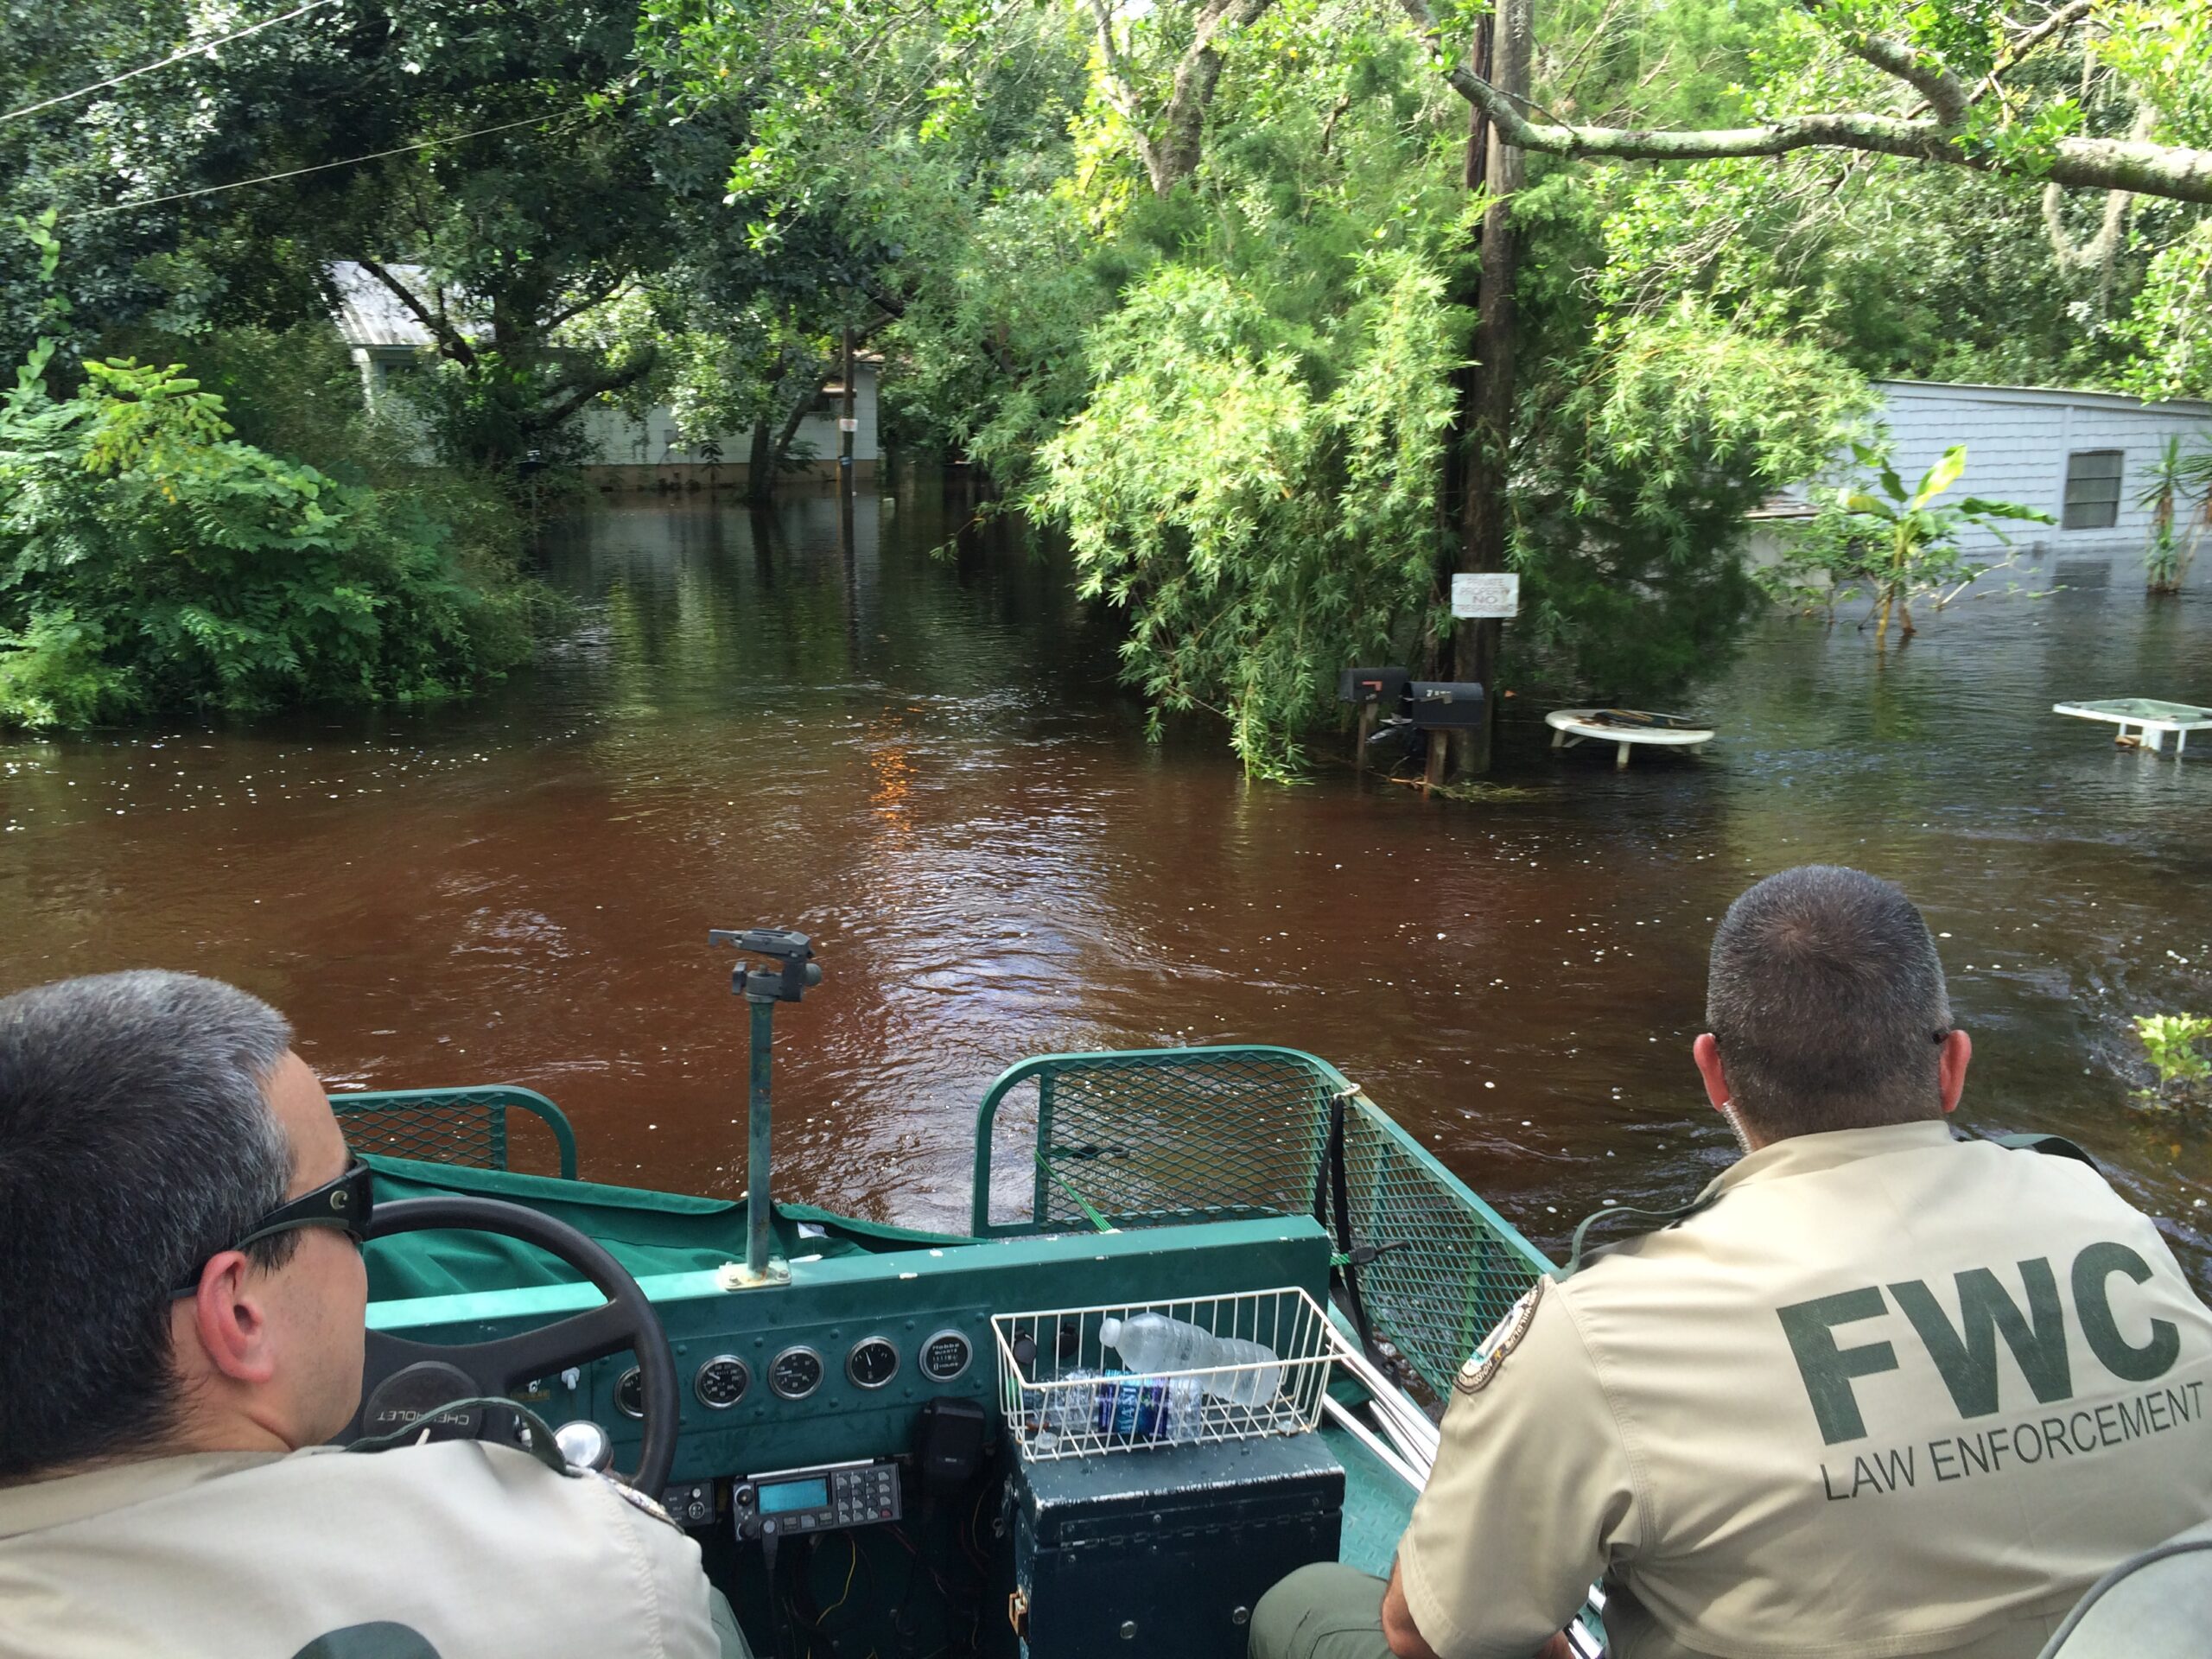 Officers from the Florida Fish and Wildlife Conservation Commission perform search and rescue on the flooded Anclote River following Hurricane Hermine.